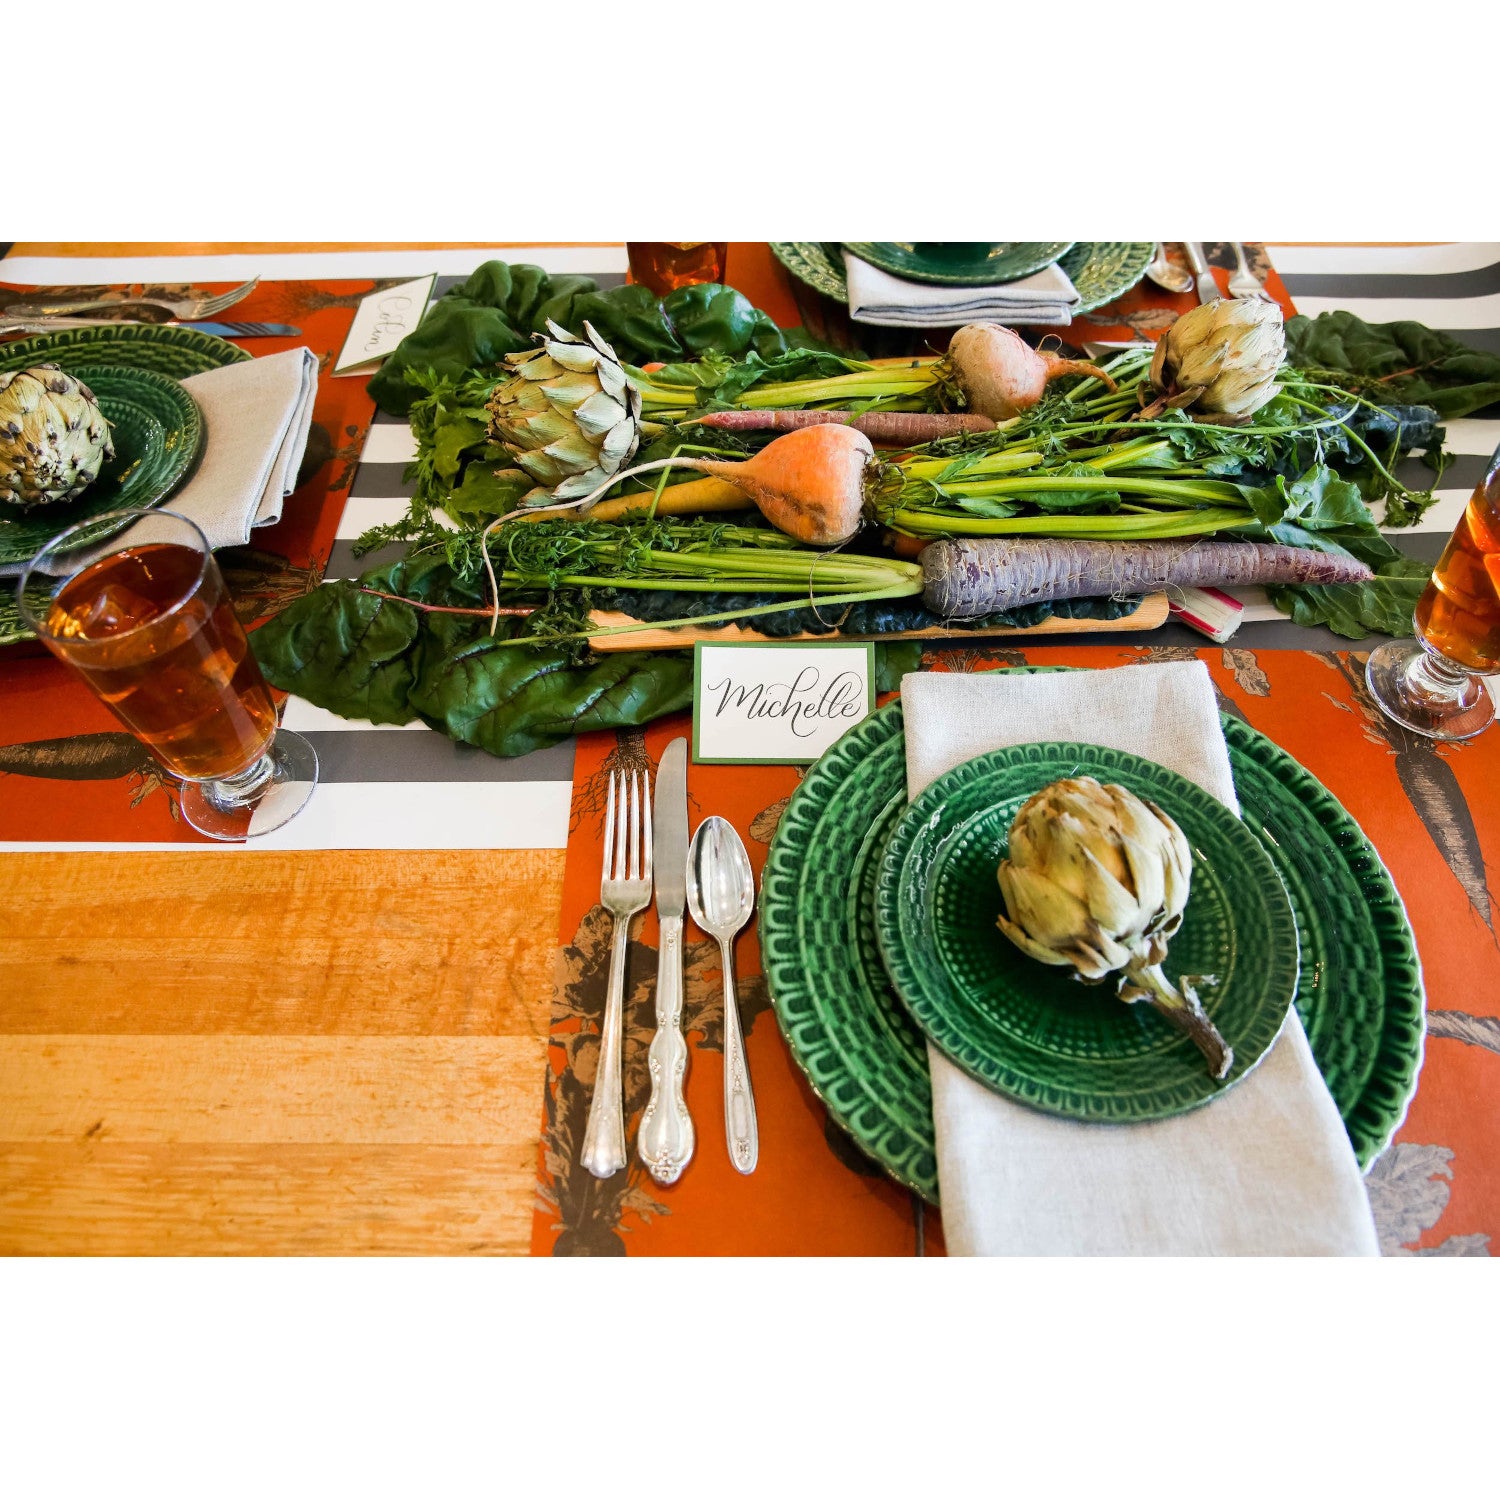 The Harvest Vegetable (Persimmon) Placemat under a rustic table setting.